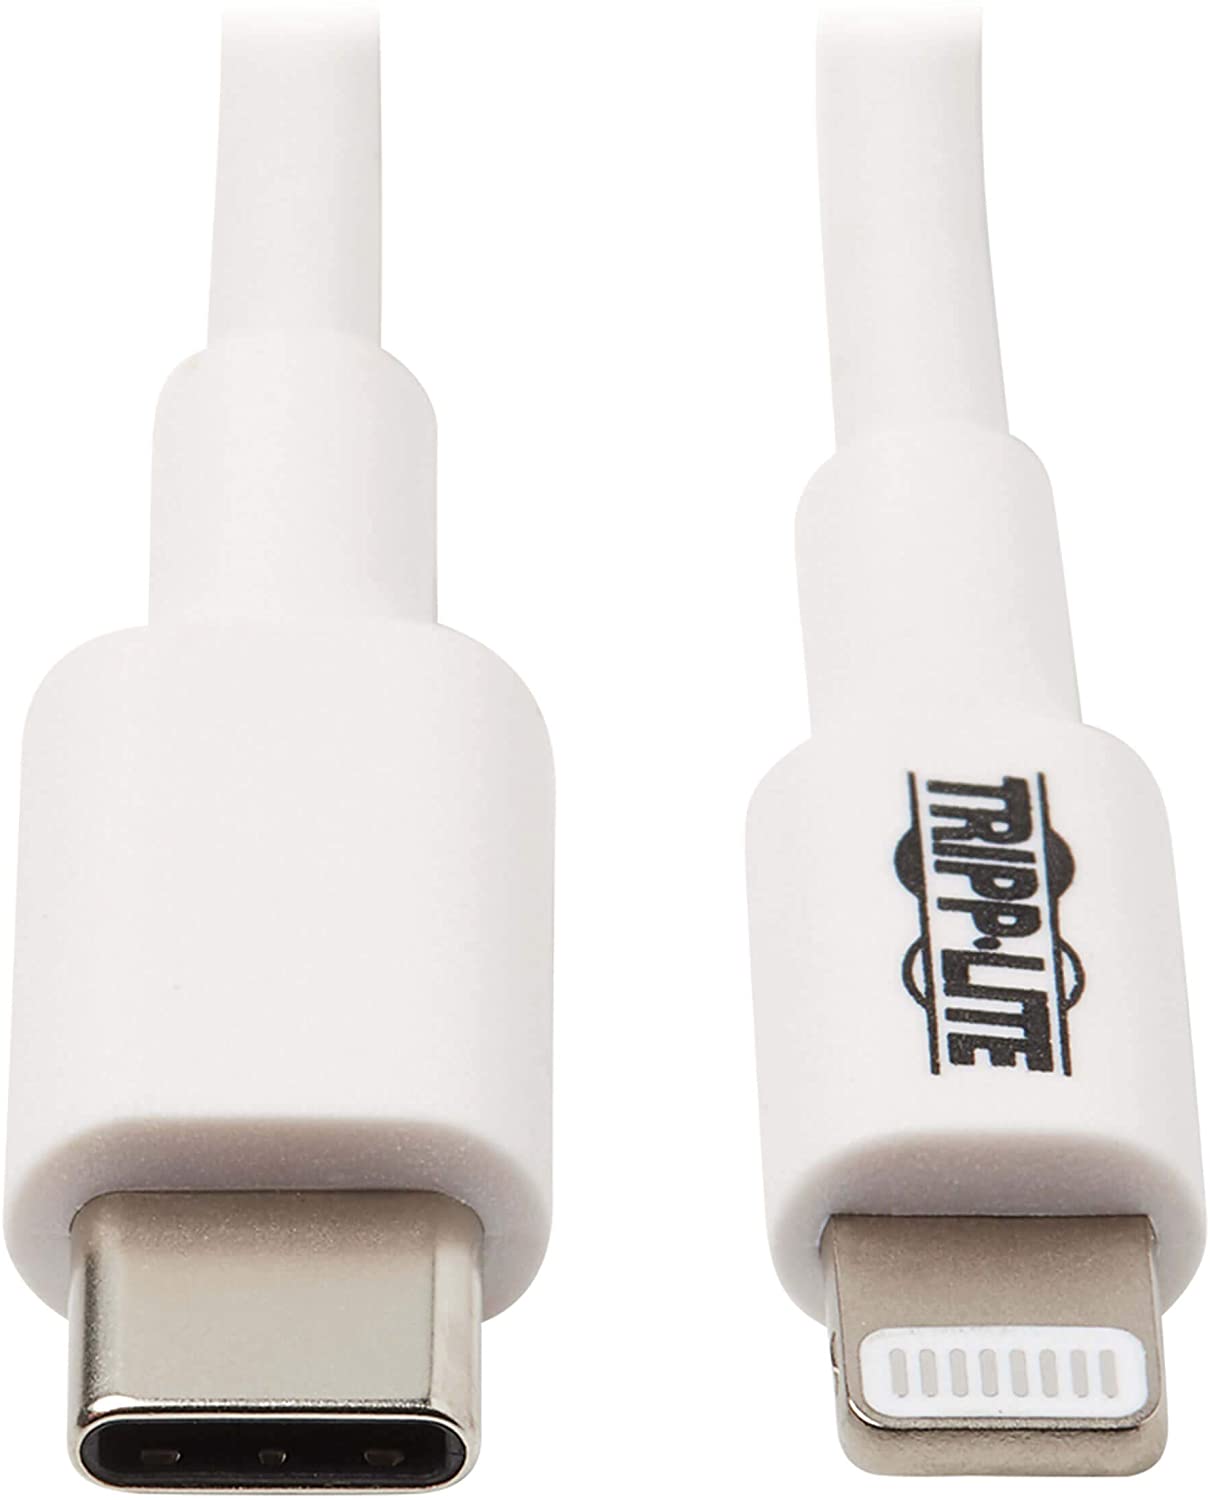 Tripp Lite Lightning to USB-C Charging &amp; Data Cable for Apple iPhone &amp; iPad, MFi Certified, White, 3 Feet / 0.9 Meters, 2-Year Warranty (M102-003-WH)